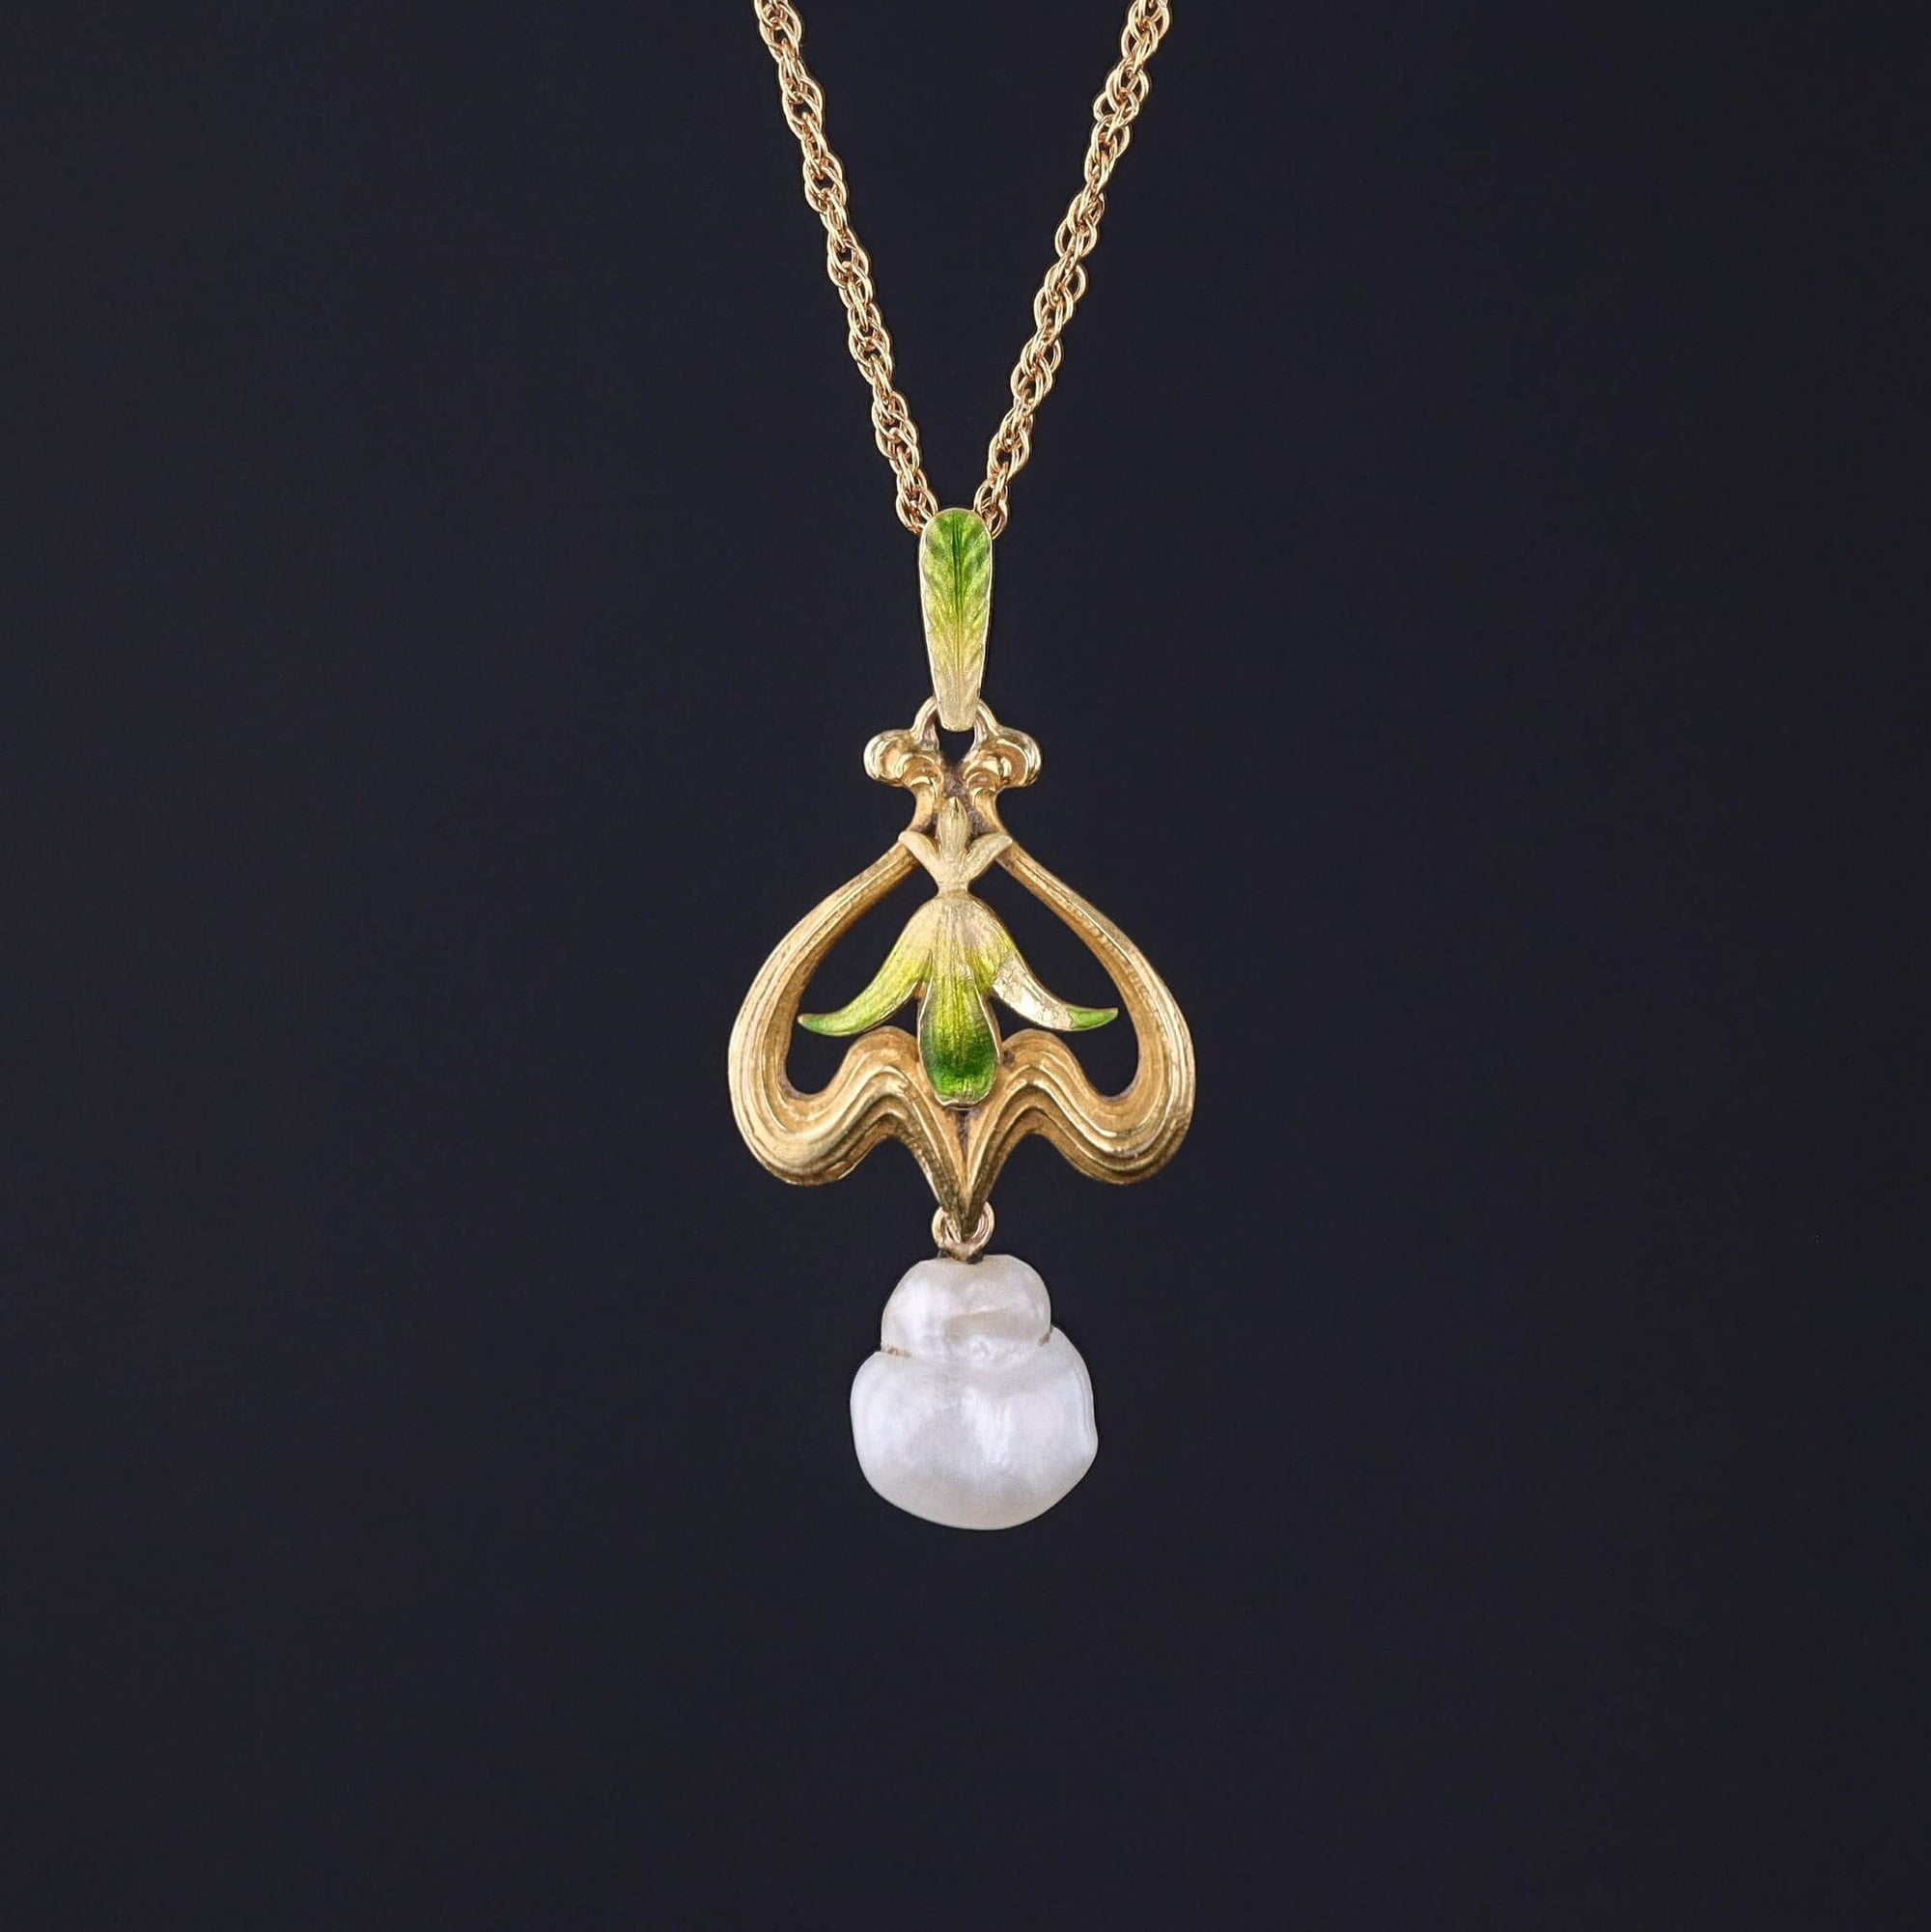 Antique Enamel and Pearl Pendant of 14k Gold